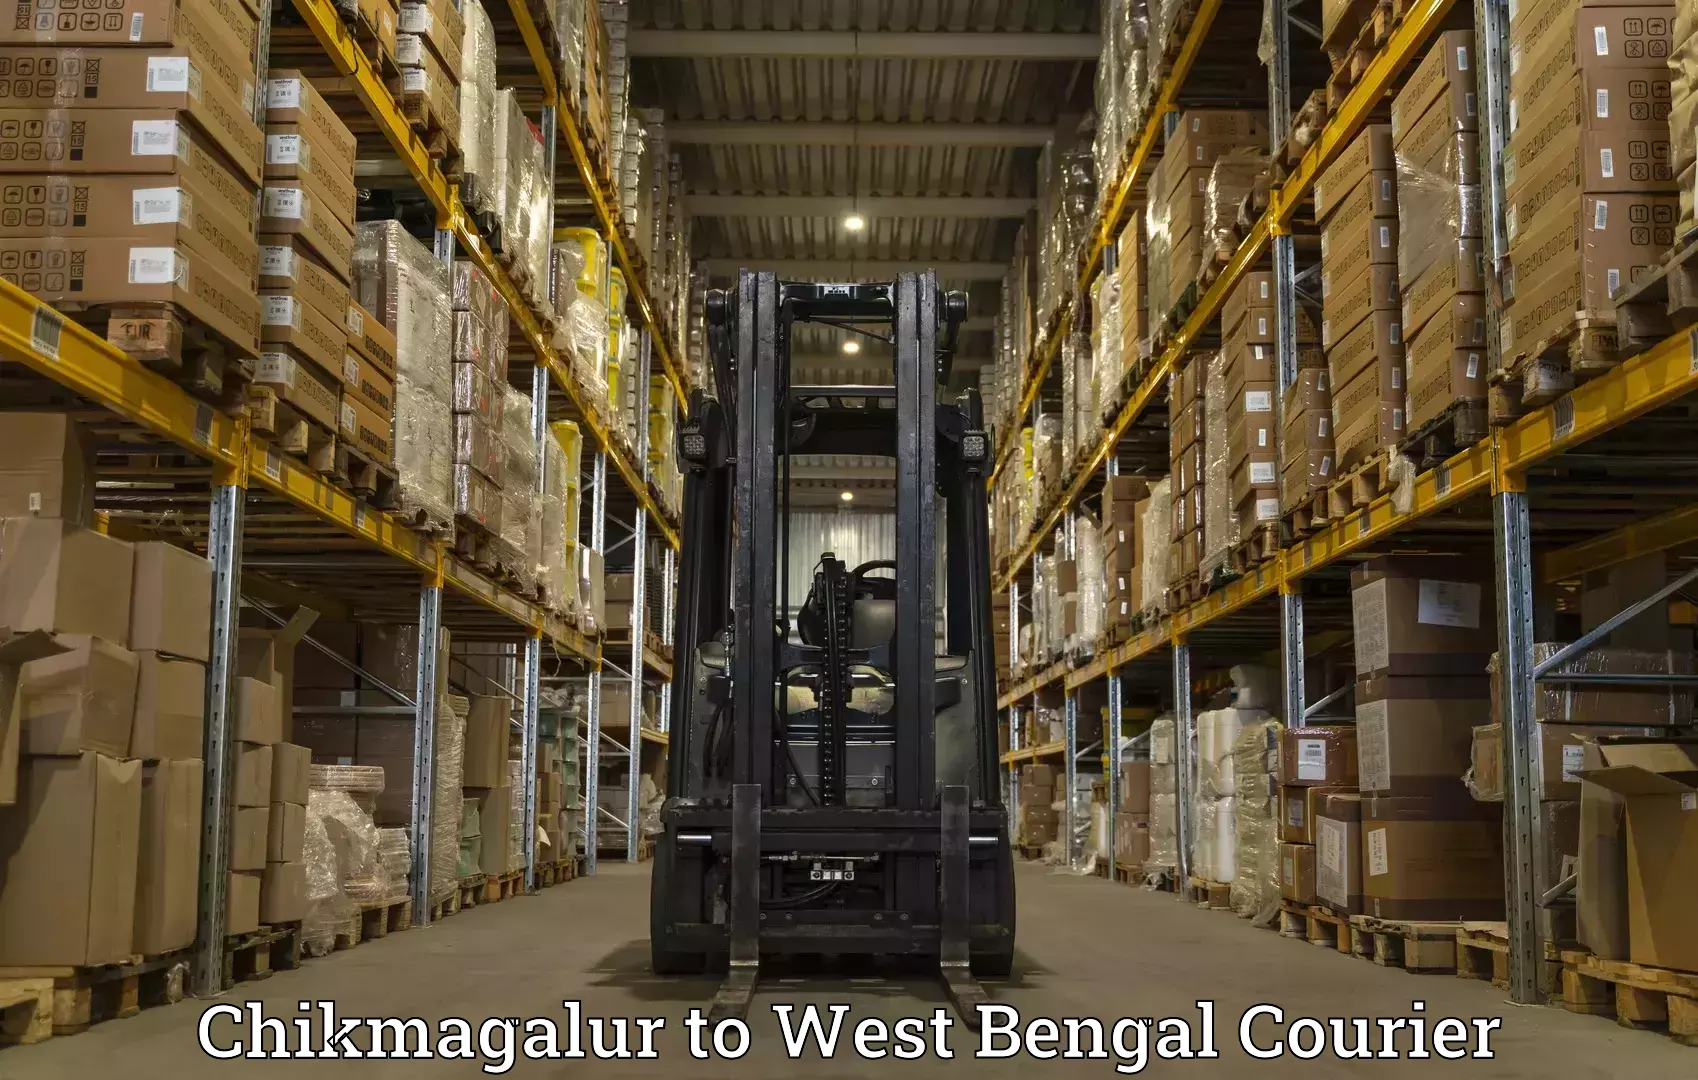 Global freight services Chikmagalur to Haldia port